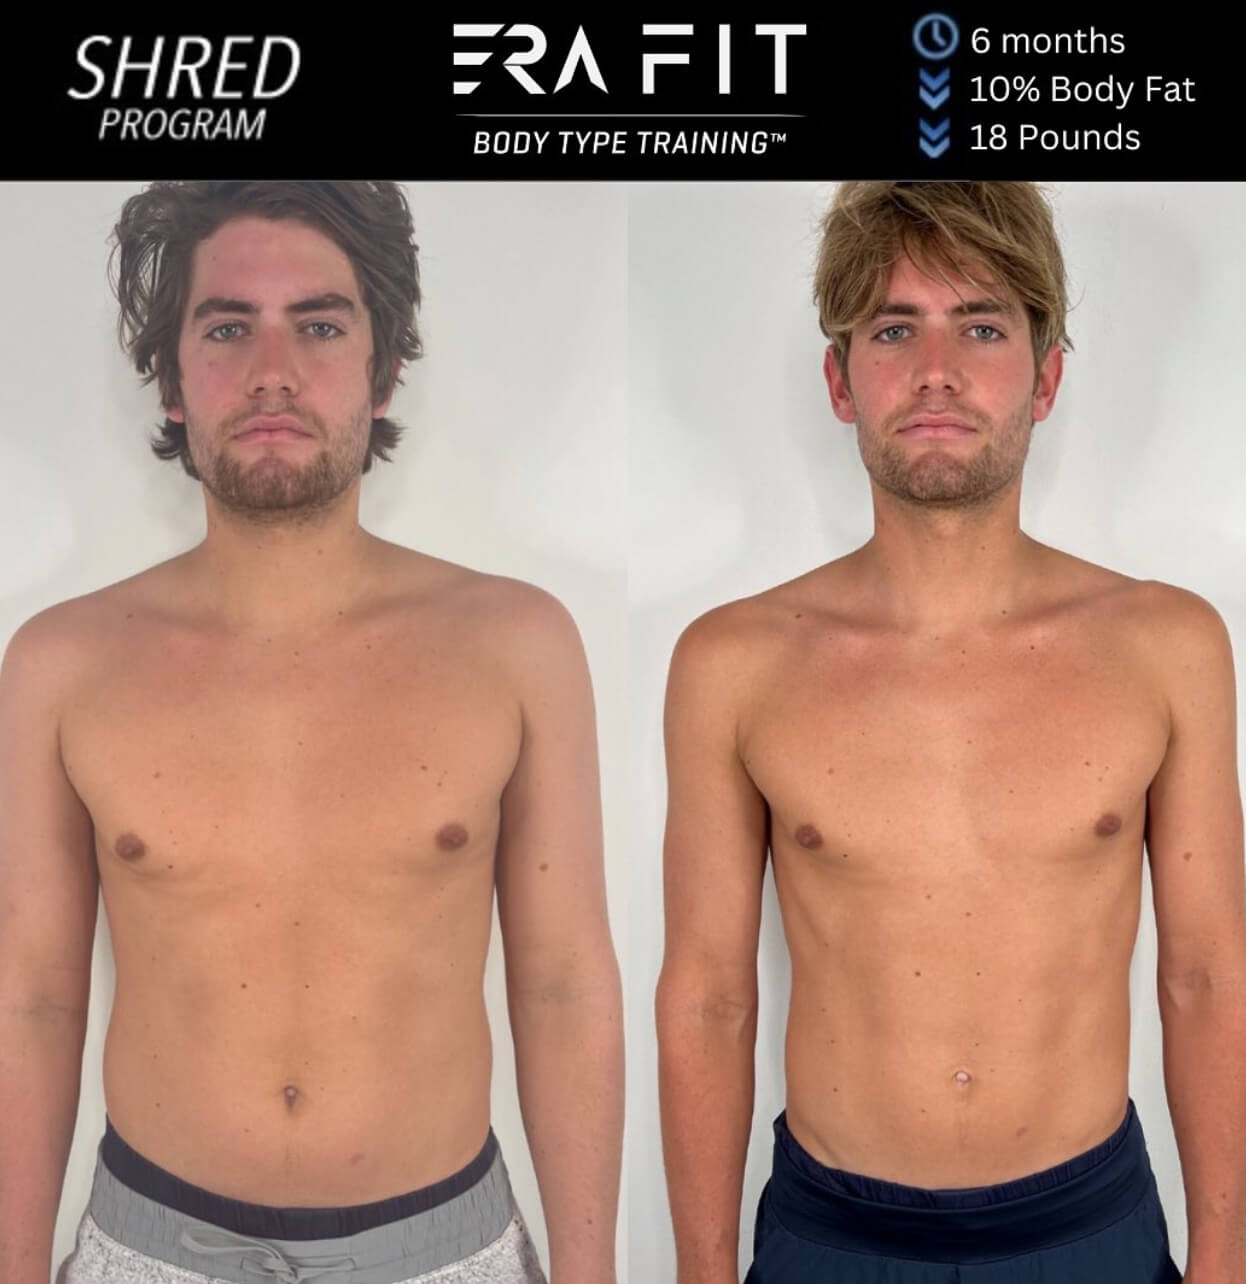 Success story showing results of Steffen Refvik